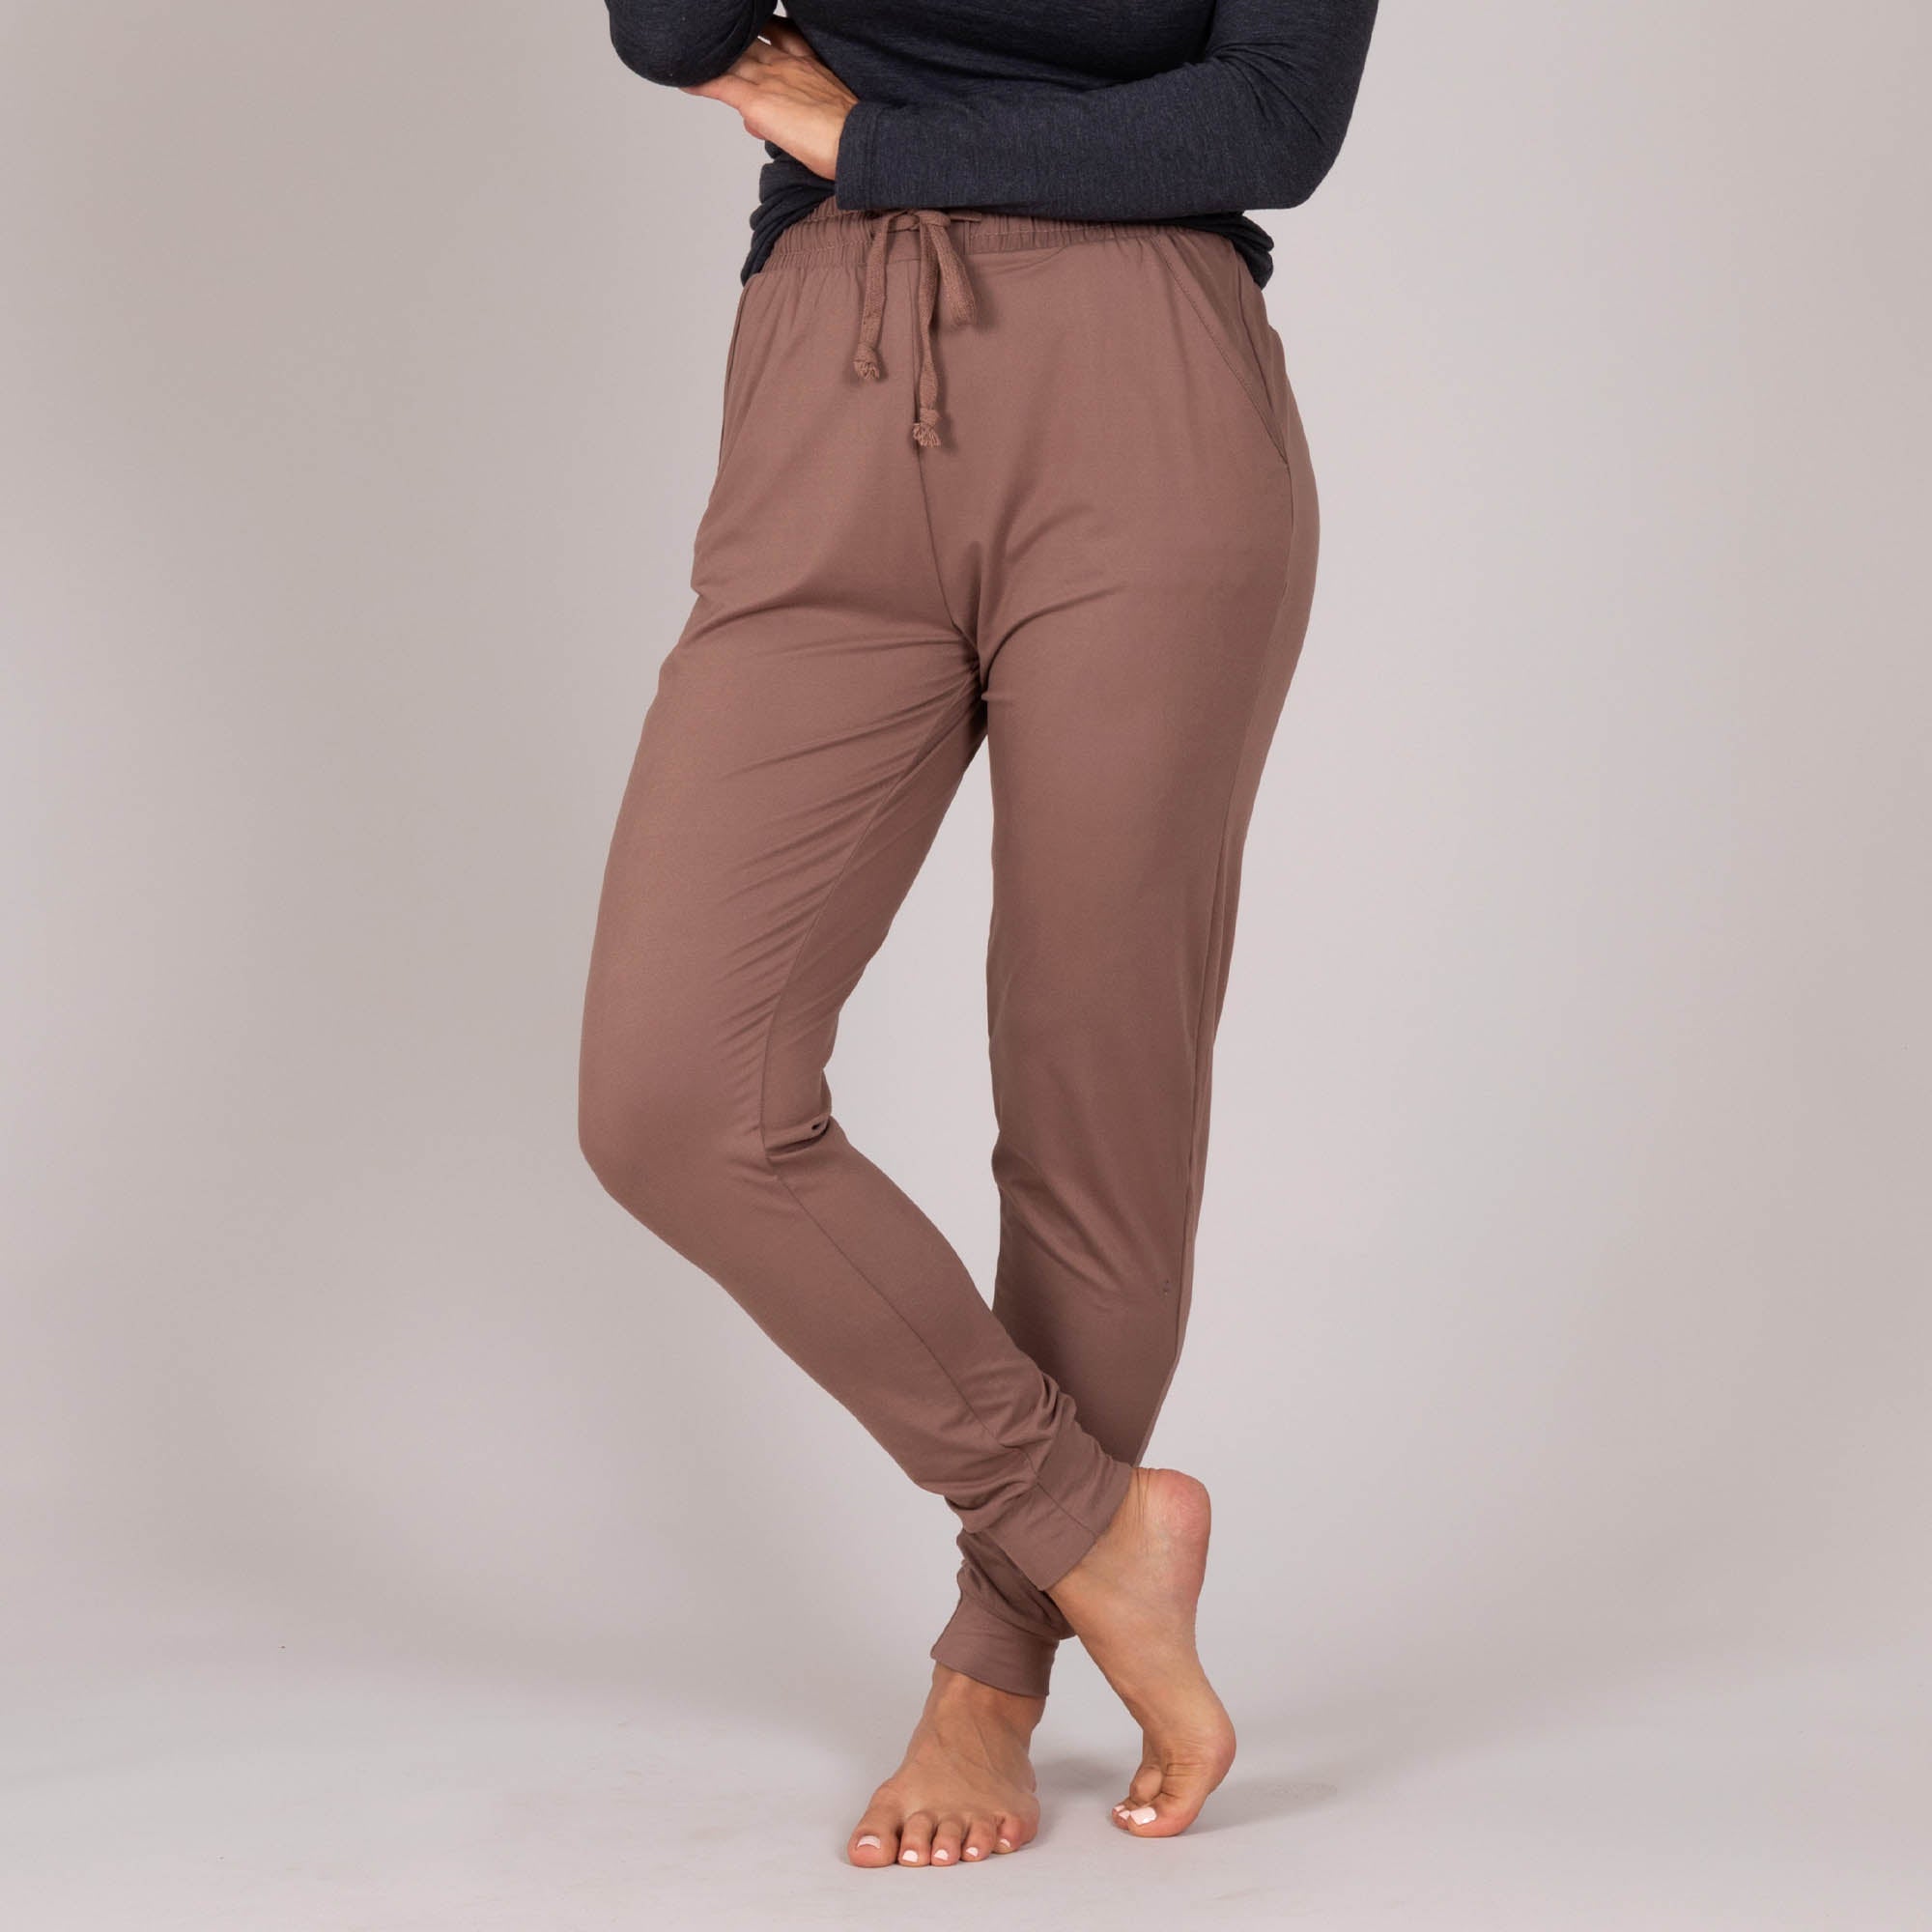 Solid Brushed Jogger Pants - Brown - 3X